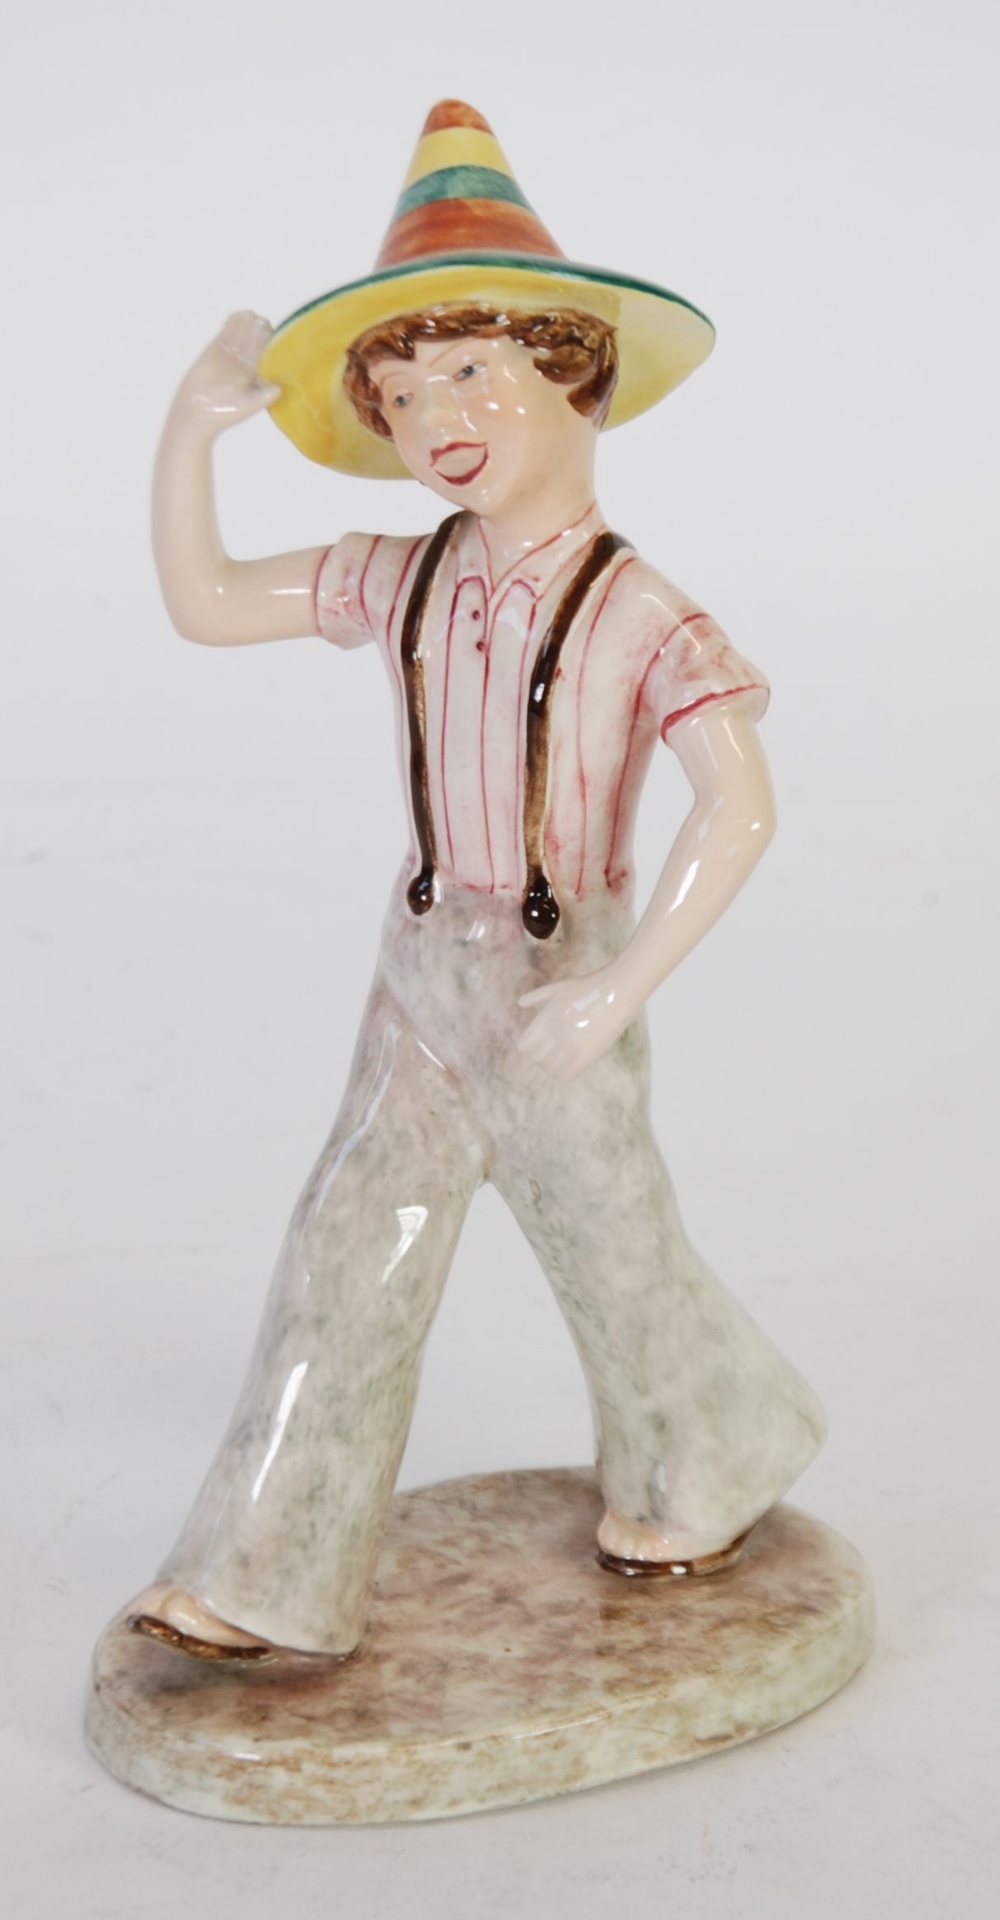 LATE GOLDSCHEIDER POTTERY FIGURE modelled as a striding boy wearing a conical hat, 9" (22.8cm) high,